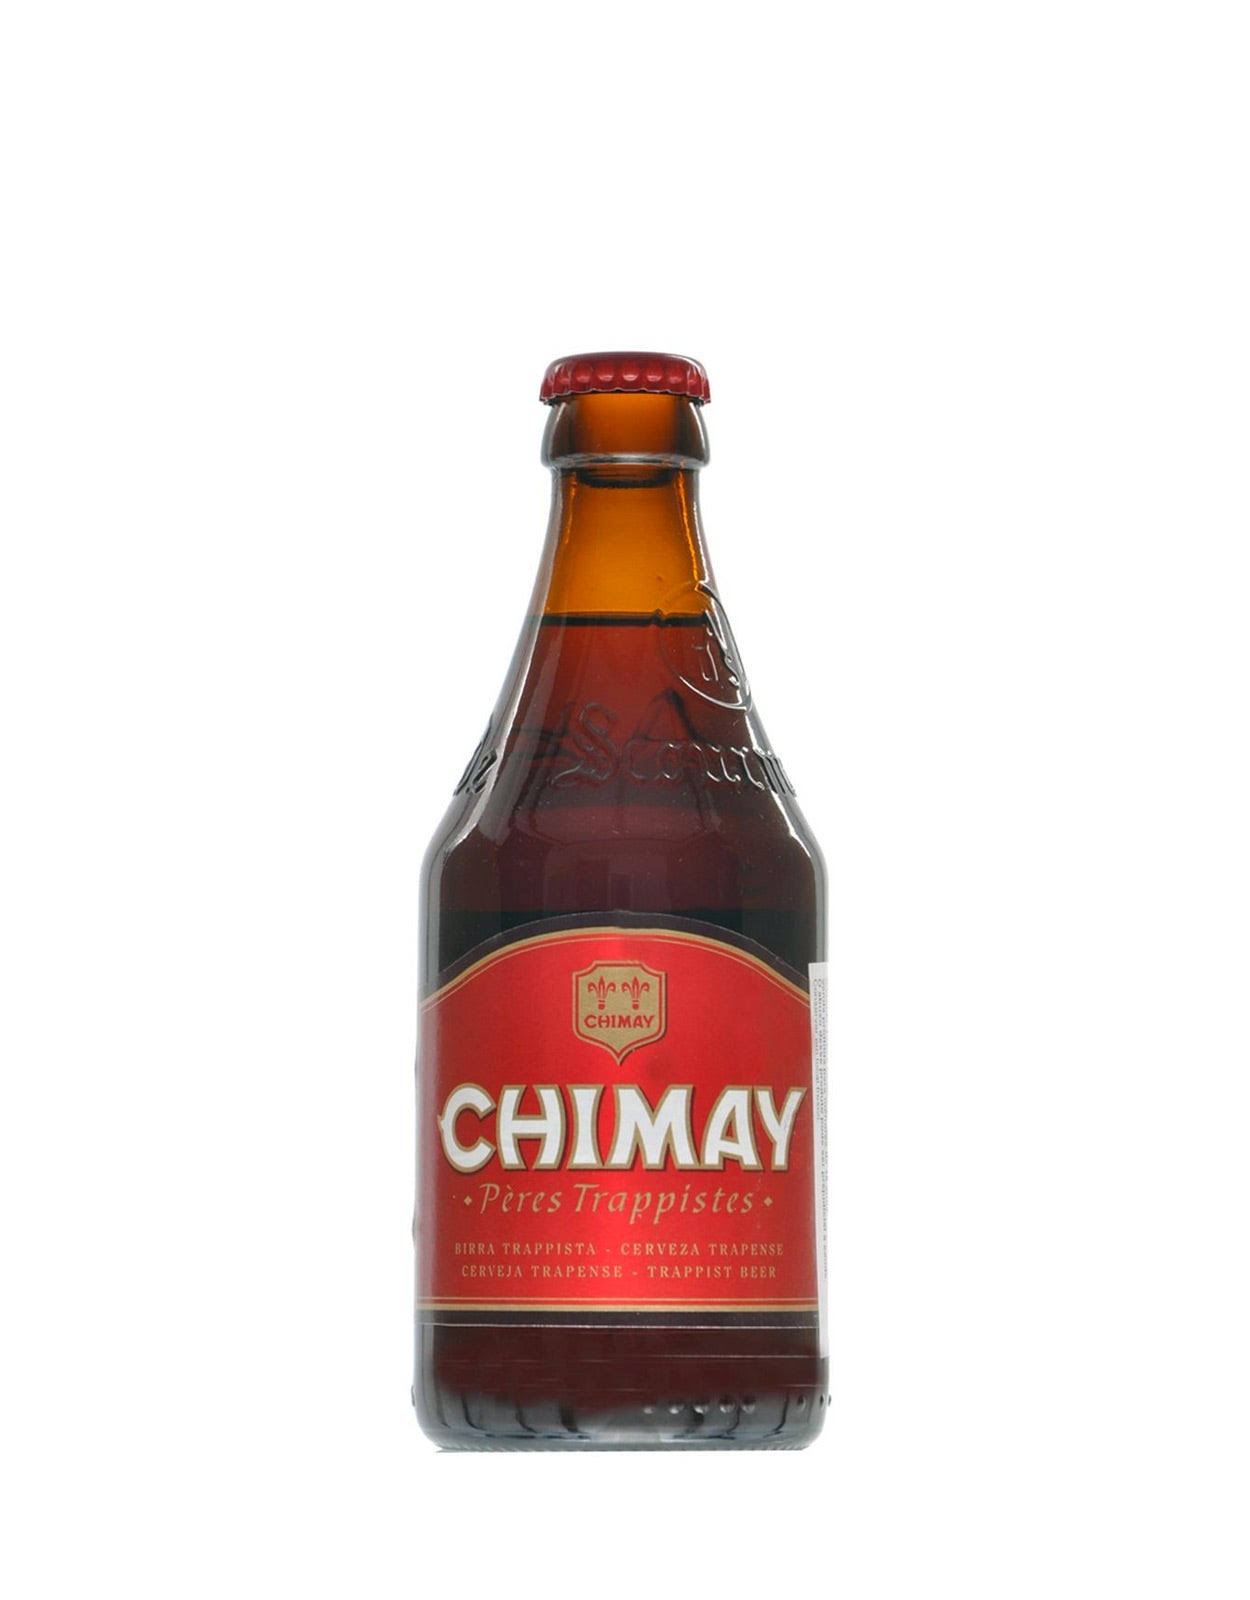 Chimay Red Cap Trappist Dubbel 330ml Bottles 6